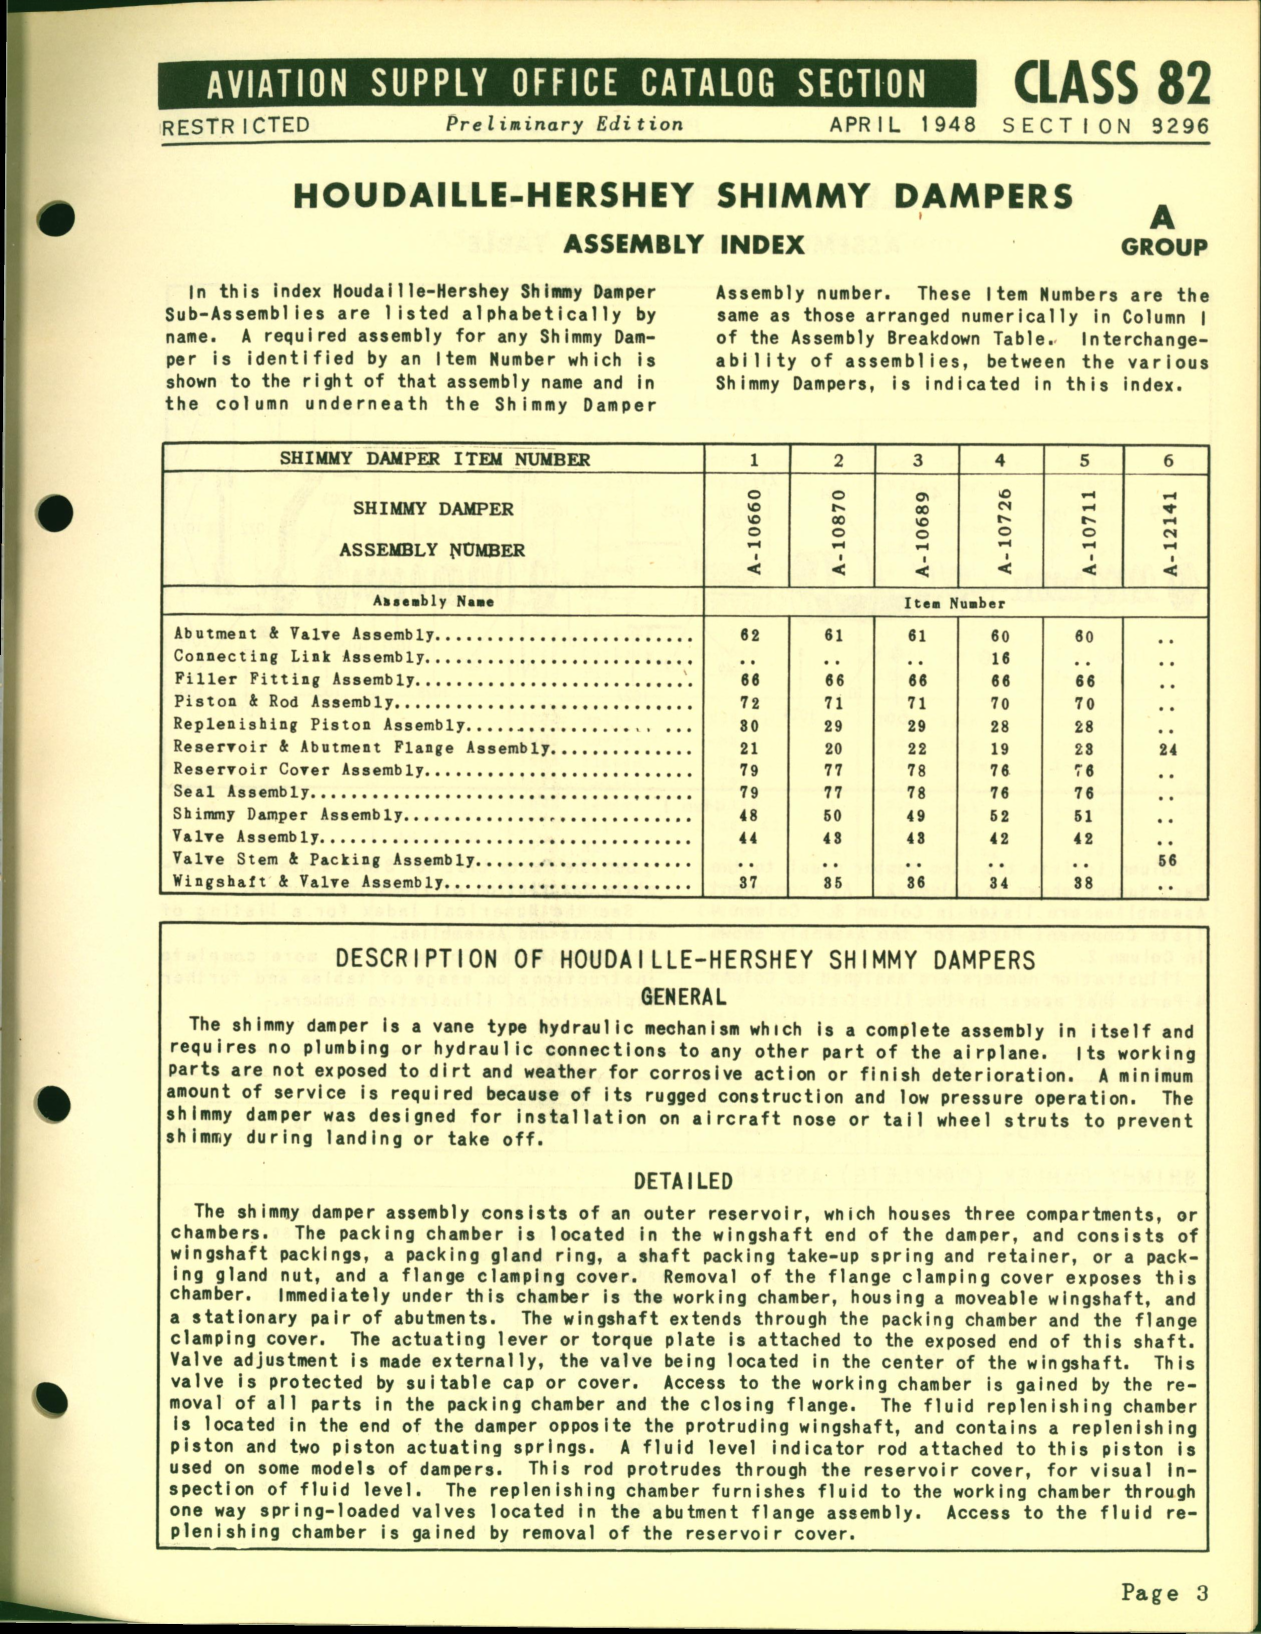 Sample page 3 from AirCorps Library document: Shimmy Dampers for Houdaille Hershey, Cleveland Pneumatic 